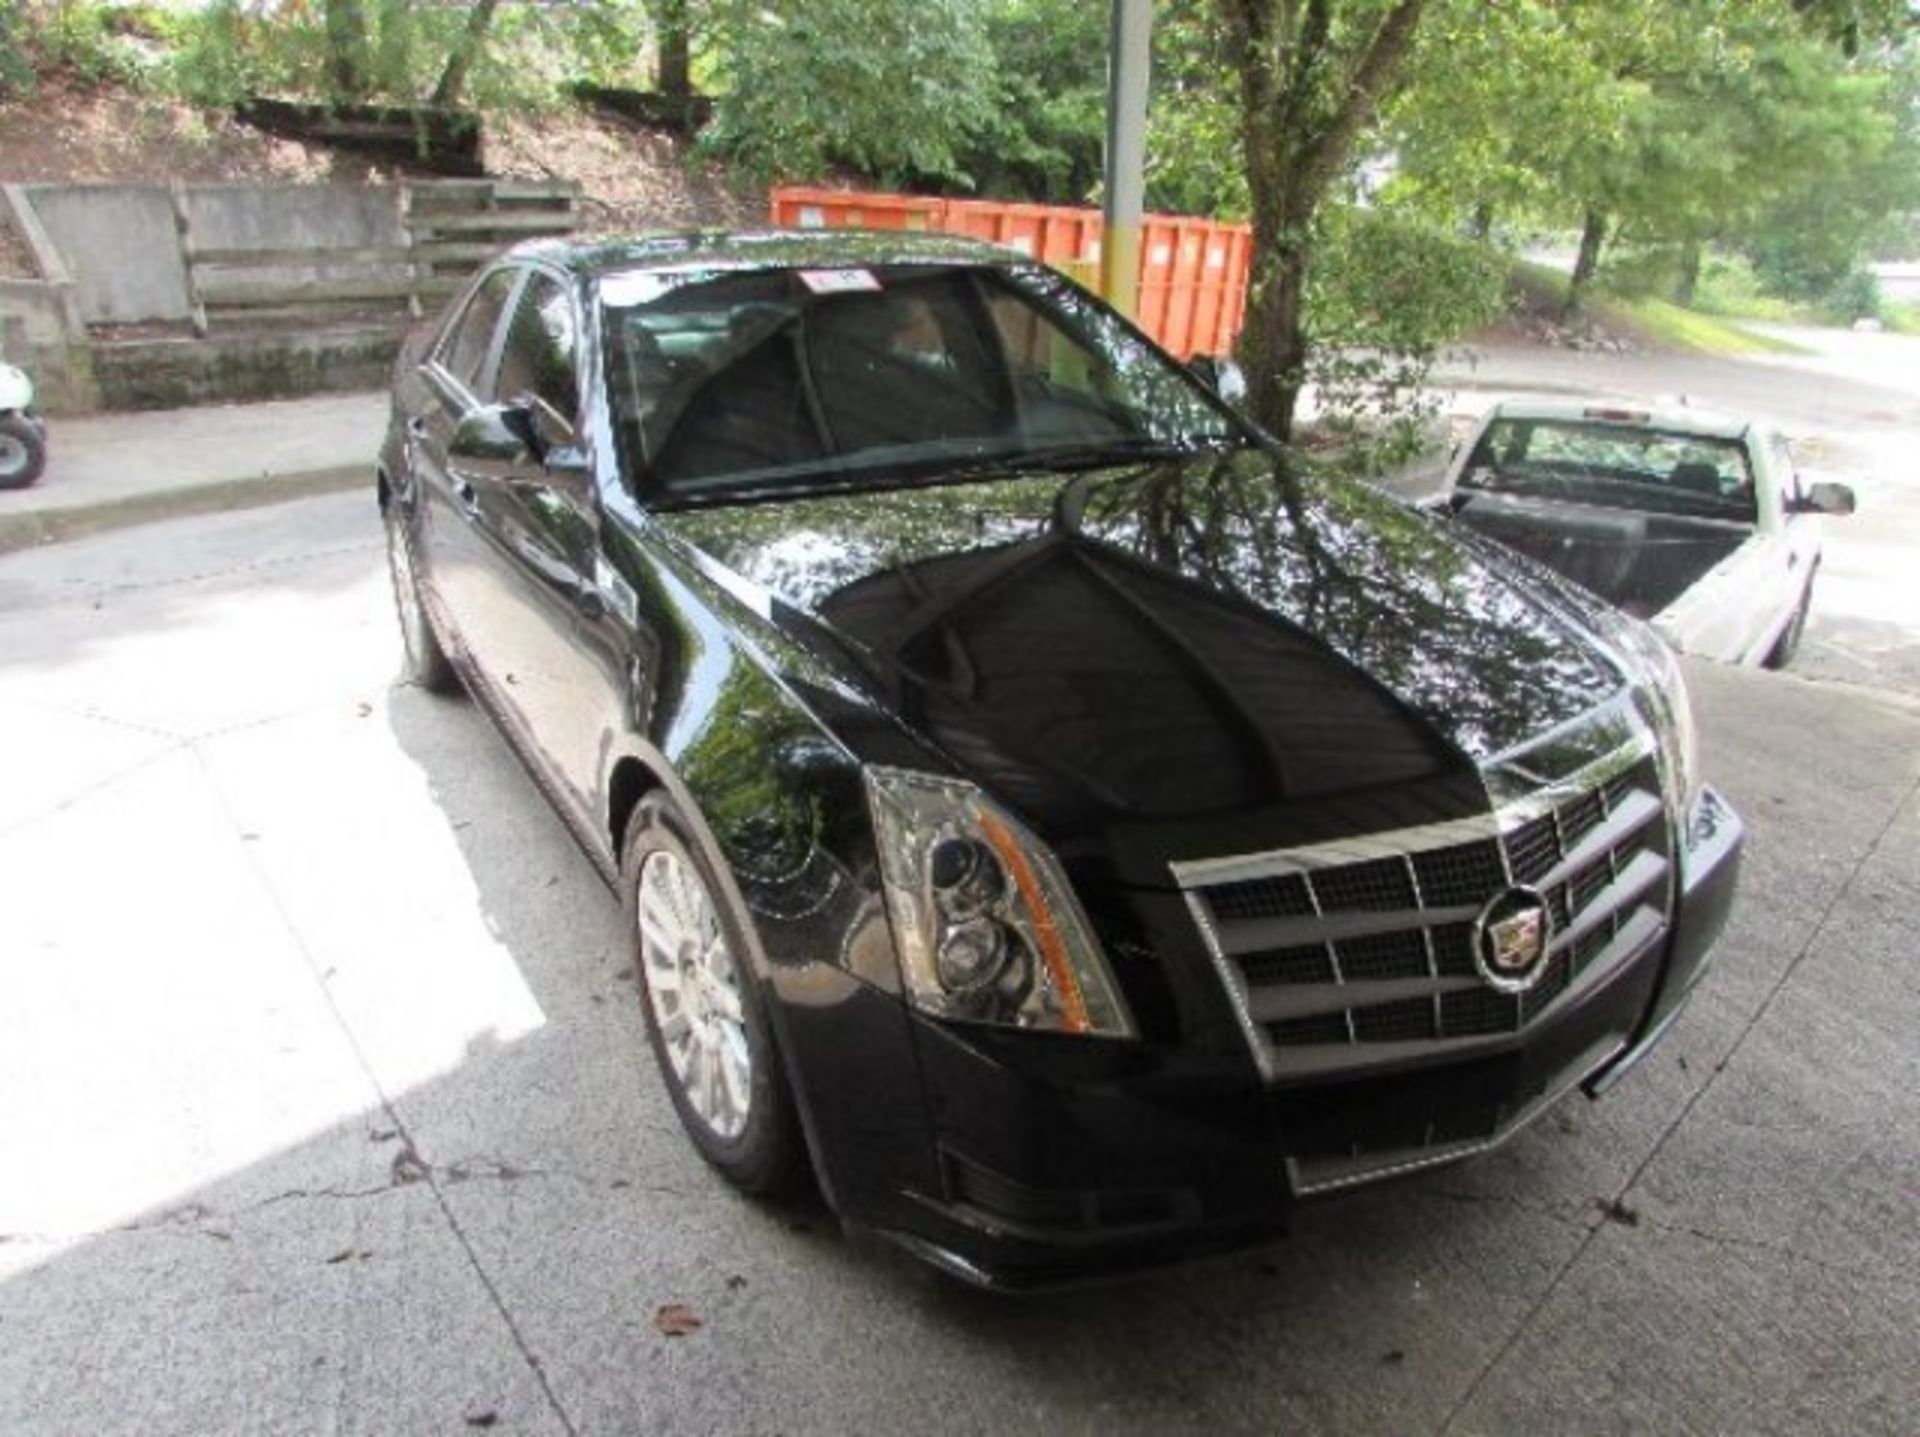 2011 Cadillac CTS, V6, Auto, leather, power windows, power doors, Loaded , ODO 75,391, VIN# - Image 3 of 4